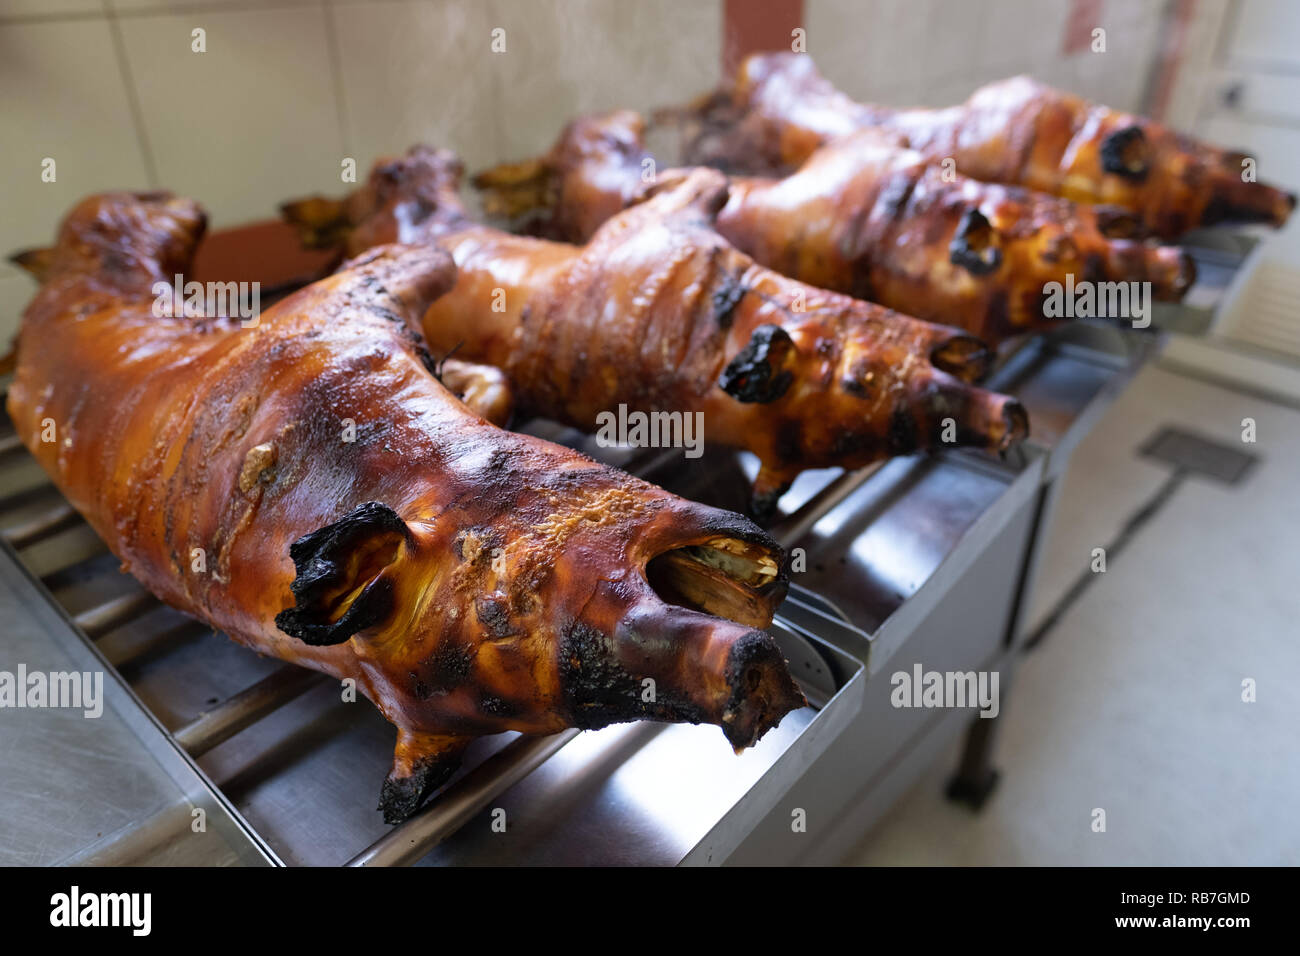 Roasted piglets on spits in traditional portuguese Bairrada region's way, Mealhada, Portugal Stock Photo